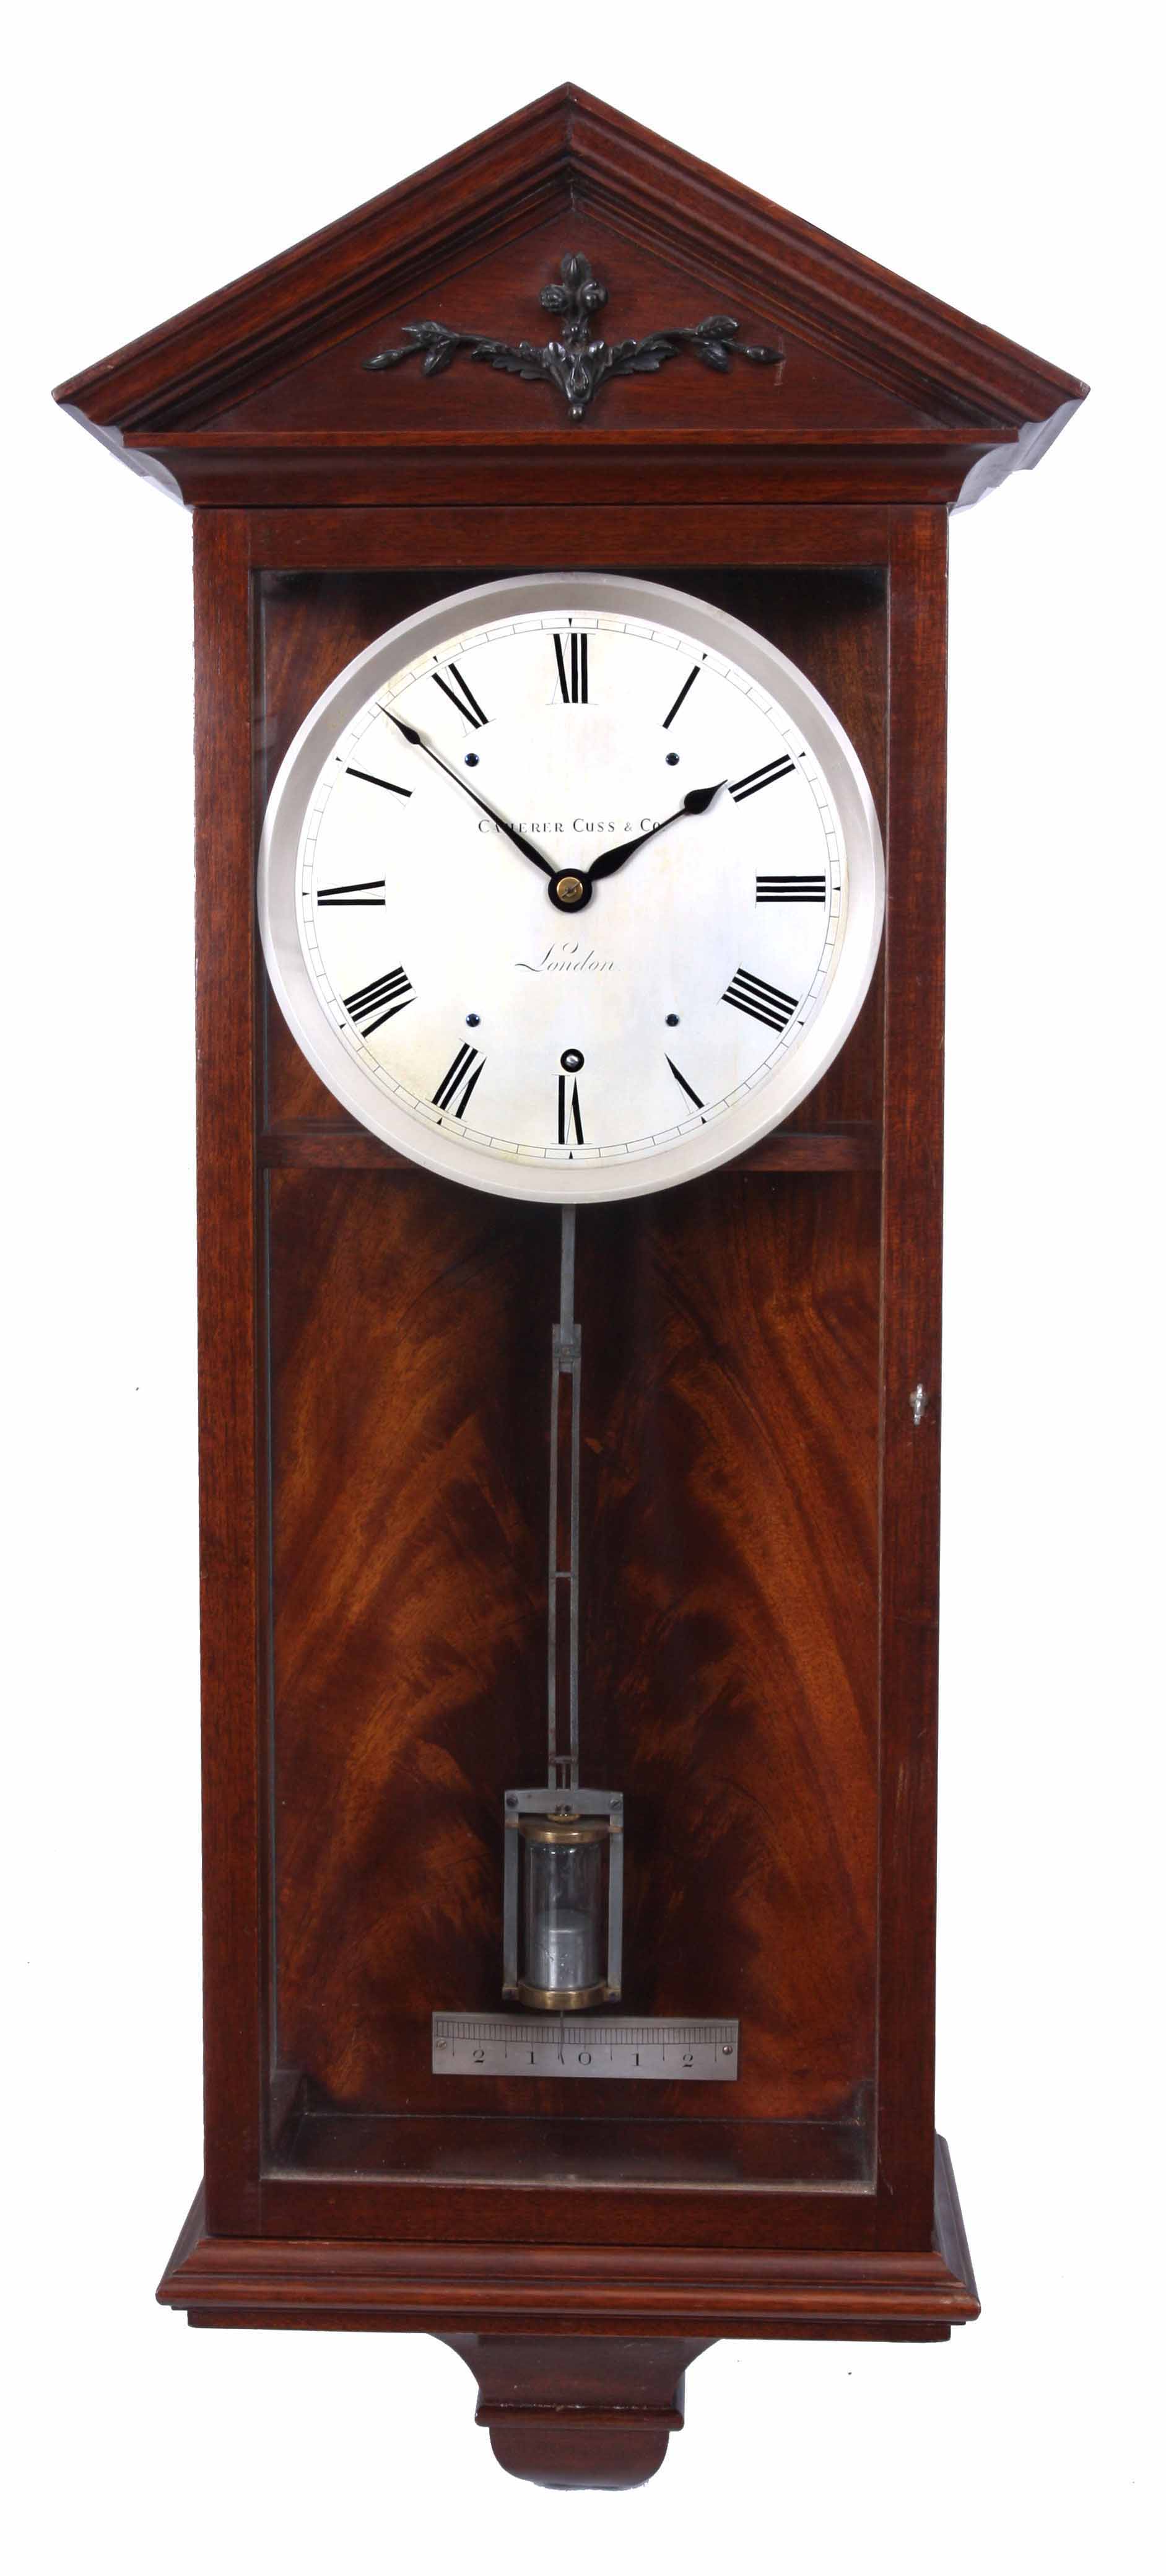 CAMERER CUSS & CO, LONDON A FINE EARLY 20TH CENTURY YEAR GOING REGULATOR WALL CLOCK the mahogany